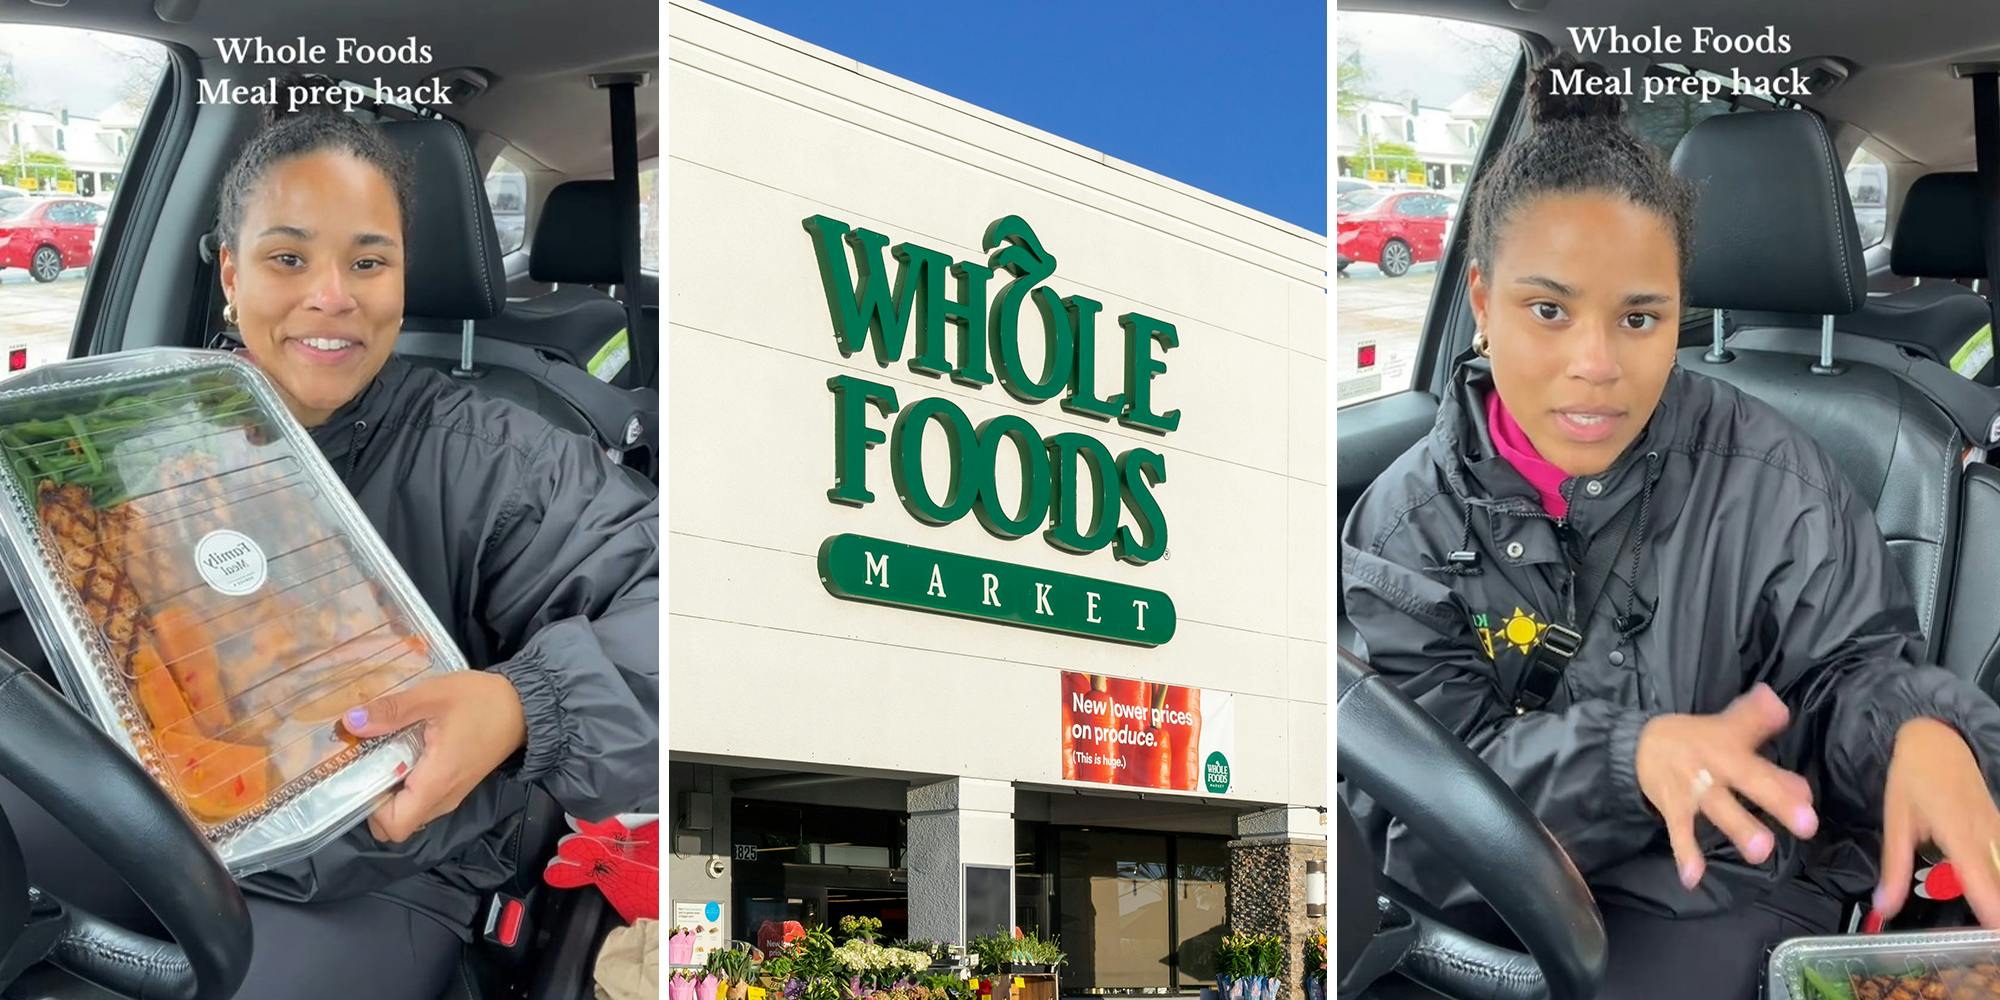 Shopper tries Whole Foods meal prep hack, says it's cheaper than buying salmon separately